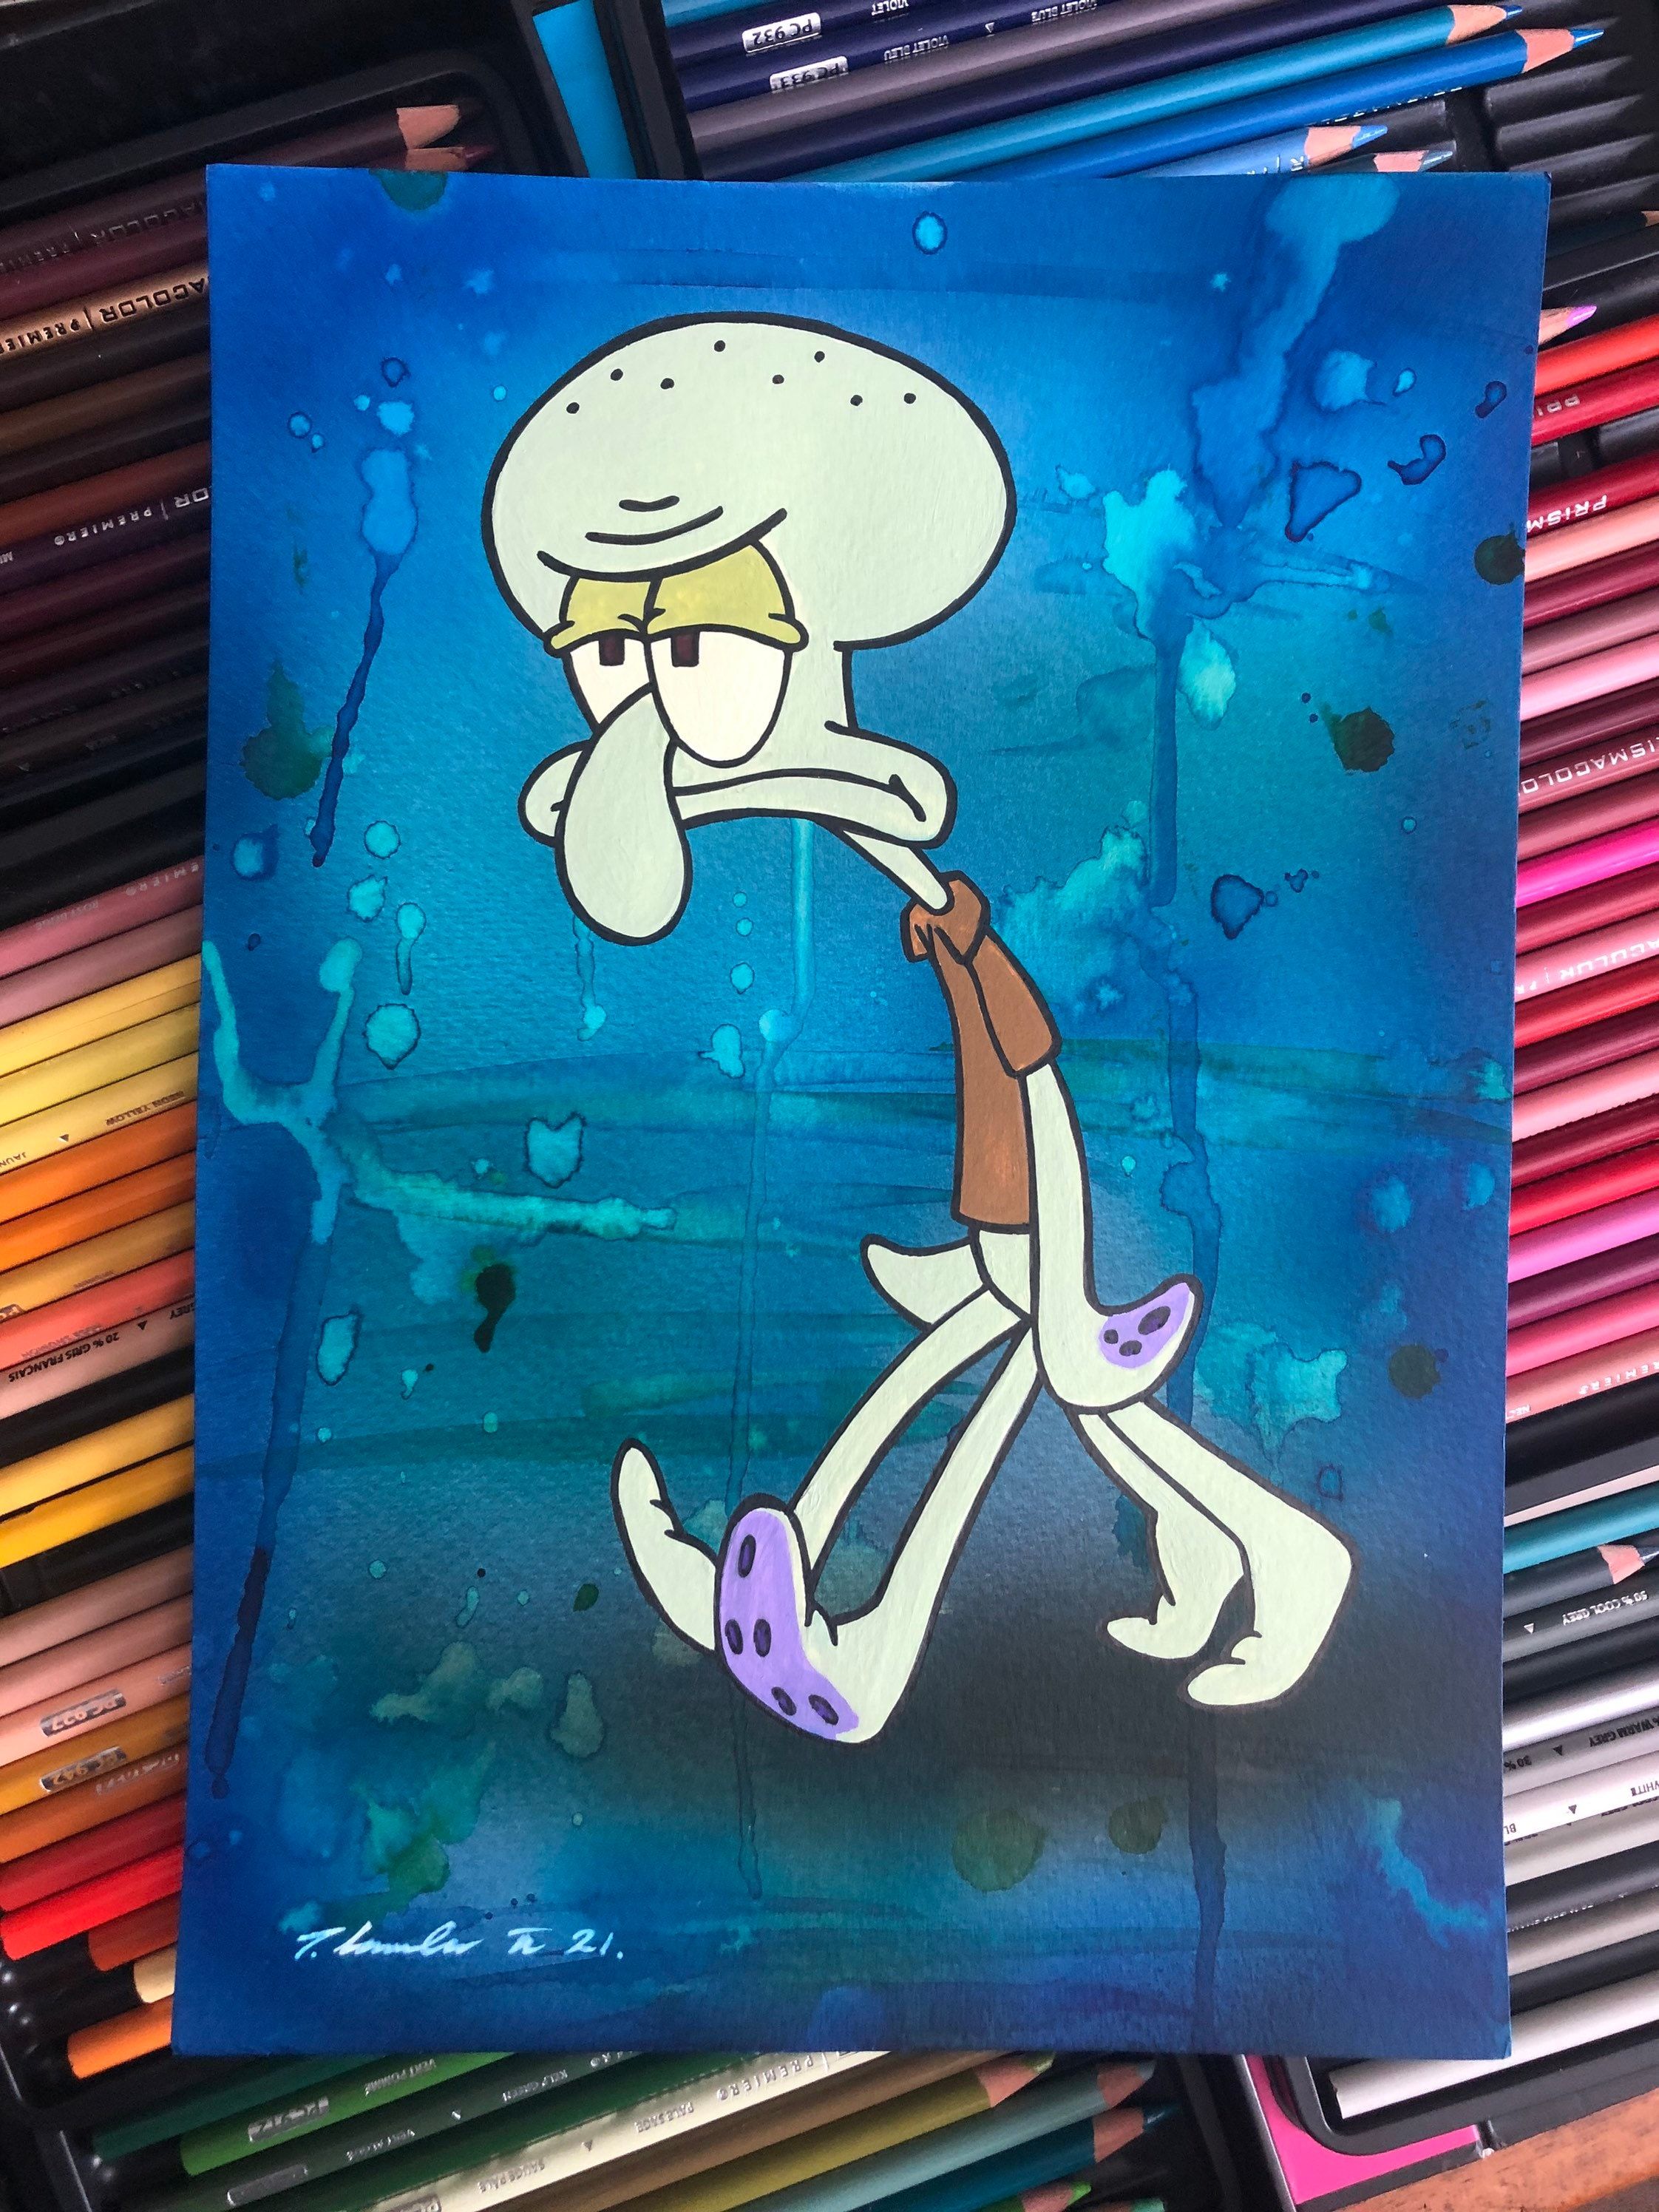 A painting of Squidward from Spongebob Squarepants. - Squidward